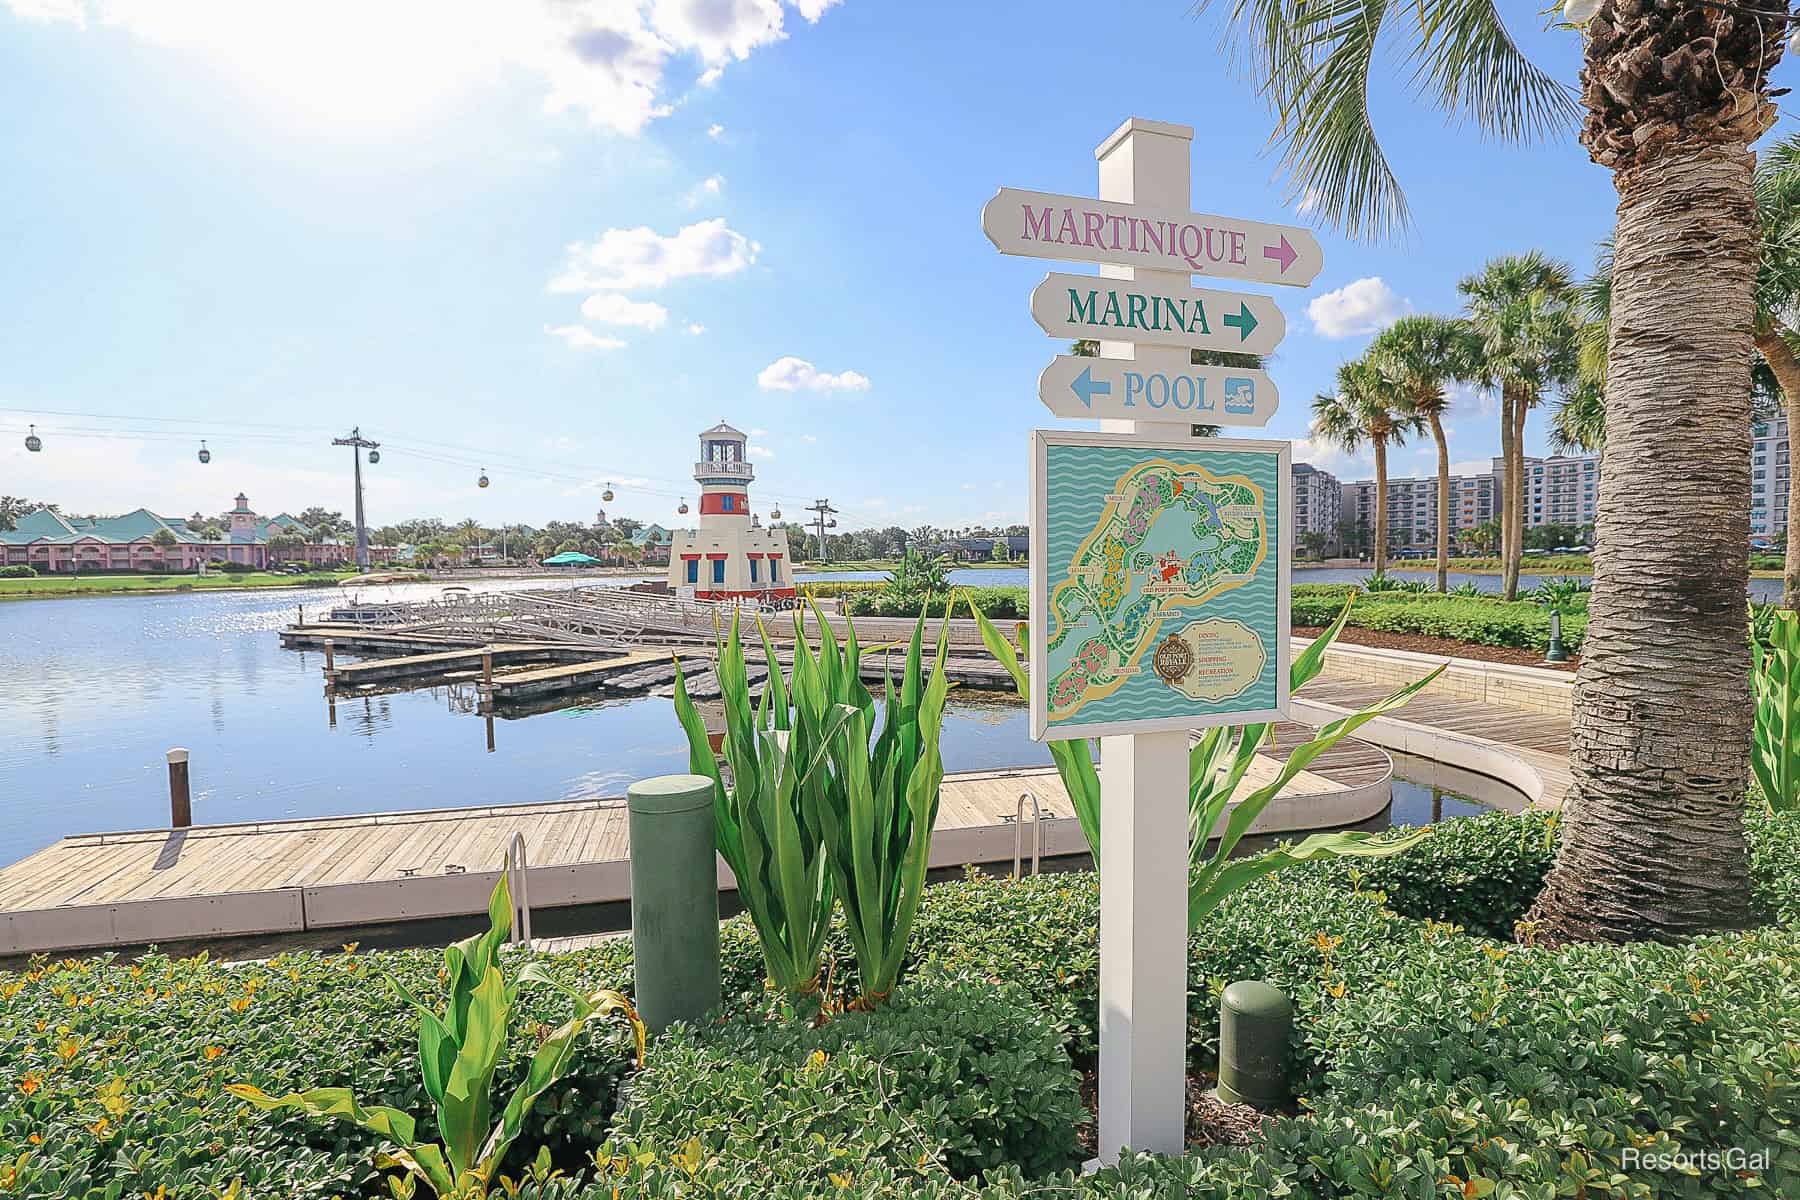 Walking Distances at Disney’s Caribbean Beach (Are They Manageable?)